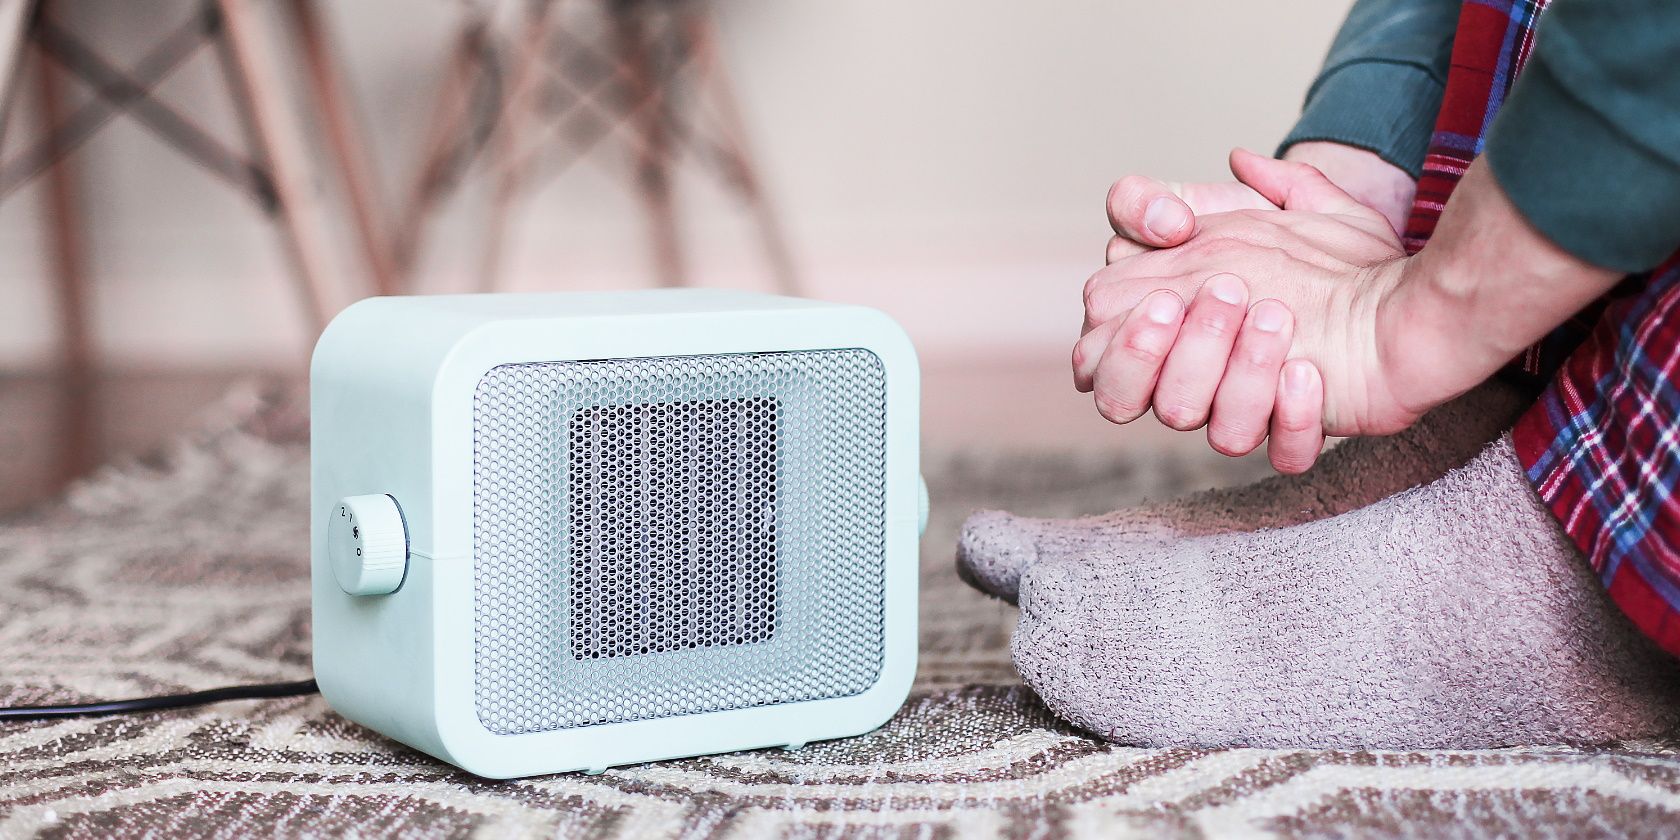 A blue heater on the carpet in a cosy room. A man in pyjamas warming his hands next to the heater